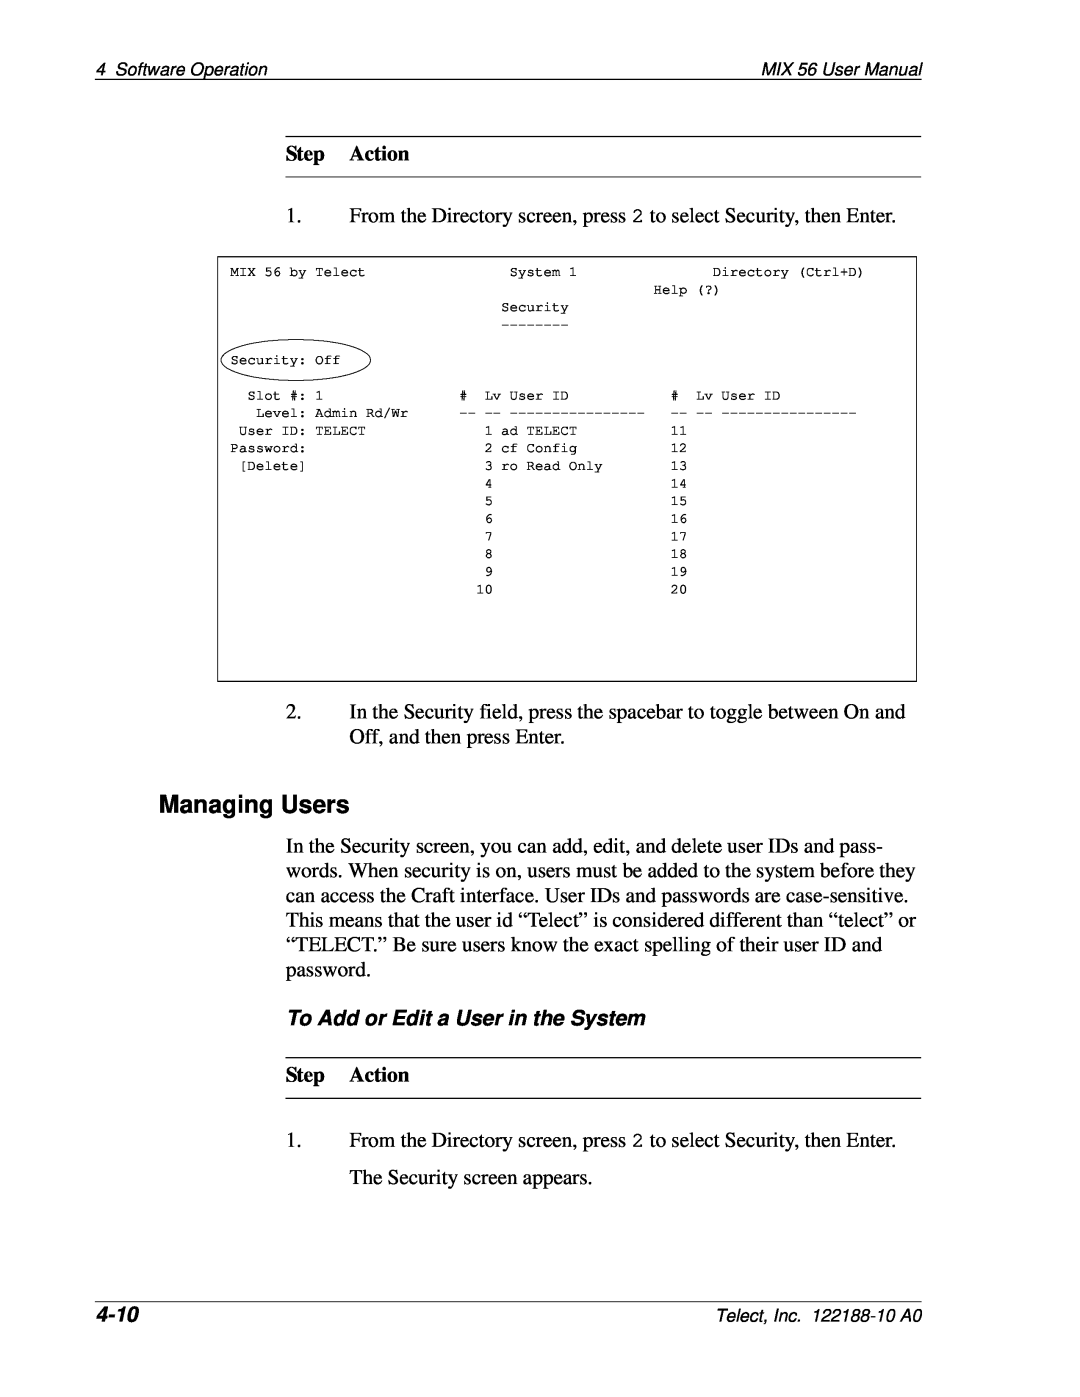 Telect MIX 56 user manual Managing Users, To Add or Edit a User in the System, 4-10, Step Action 